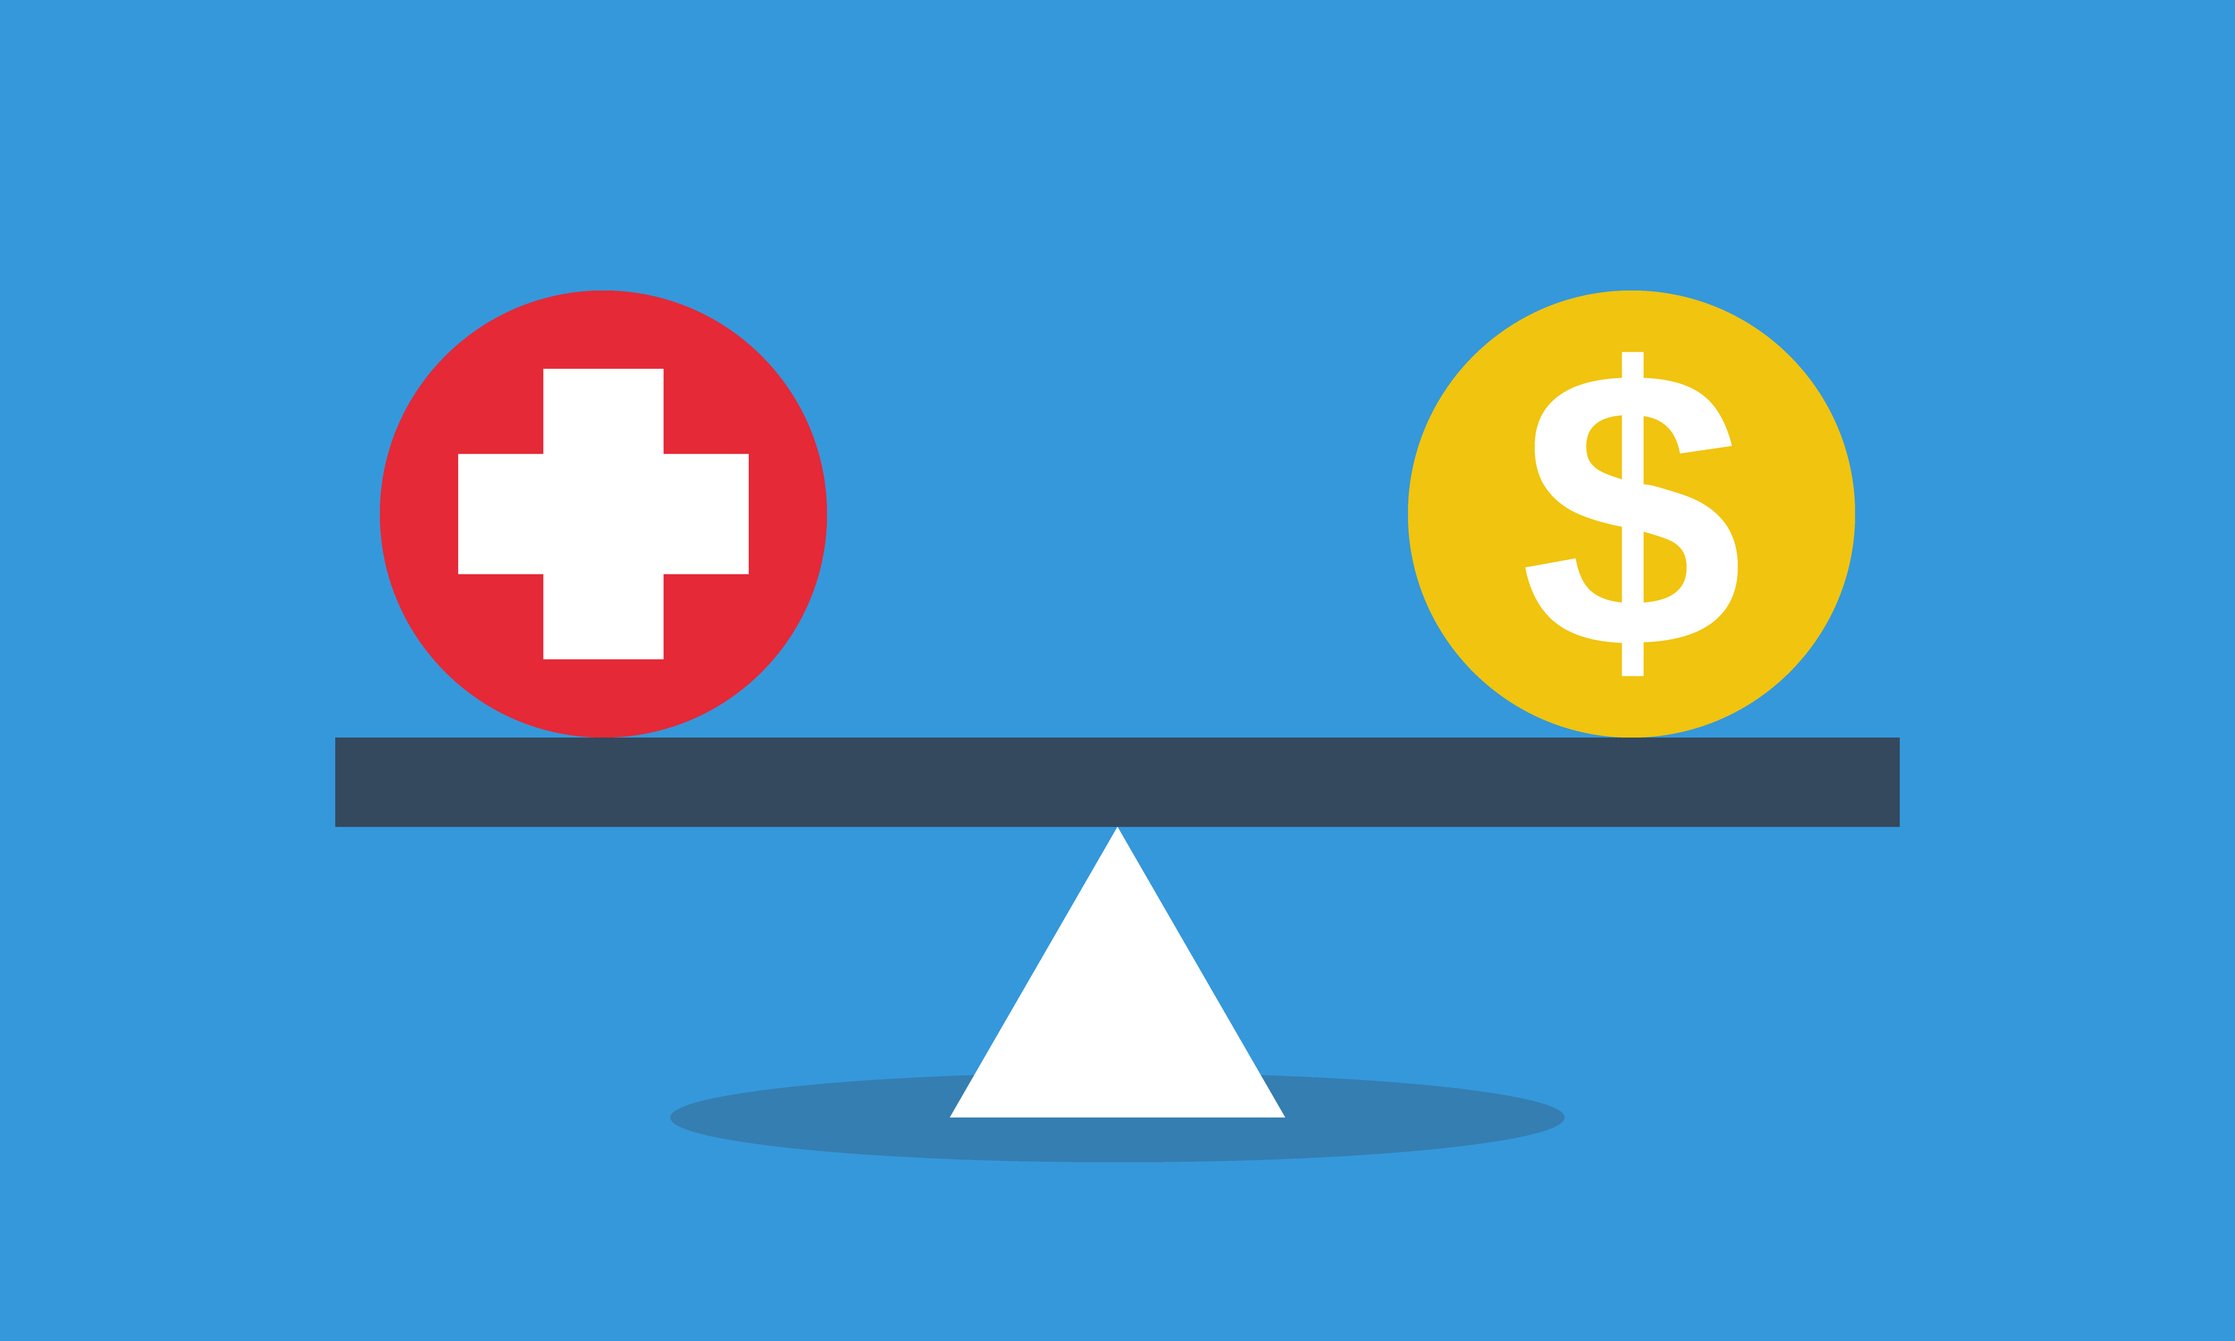 Medical cross and dollar coin in equilibrium on seesaw